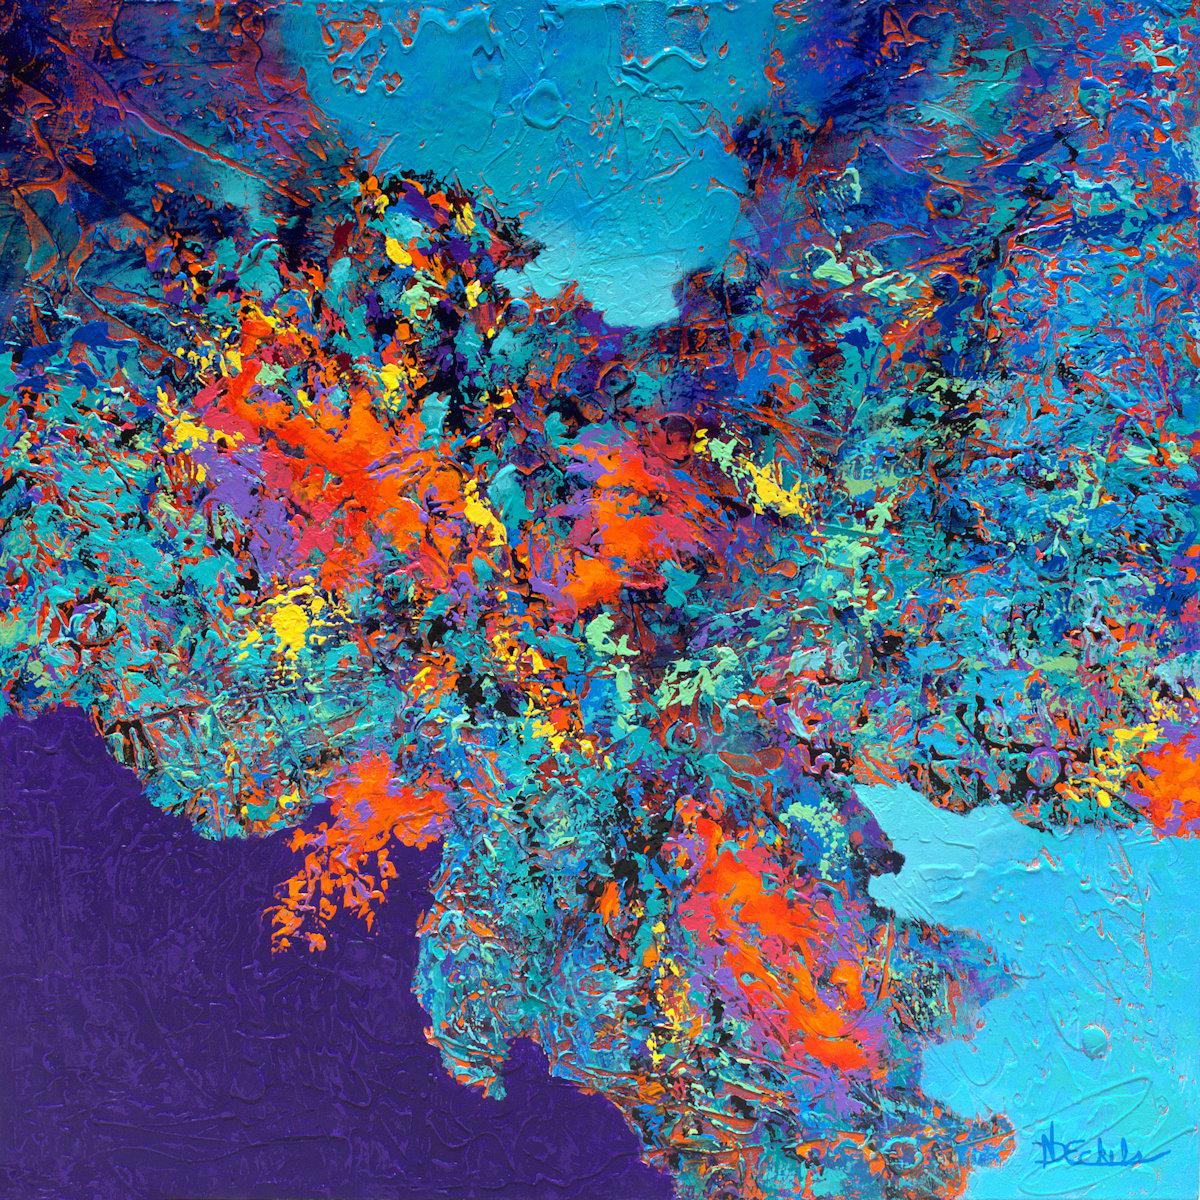 Some Like It Hot" bold abstract with textural rich blues, teal, aqua, reds - Mixed Media Art by Nancy Eckels